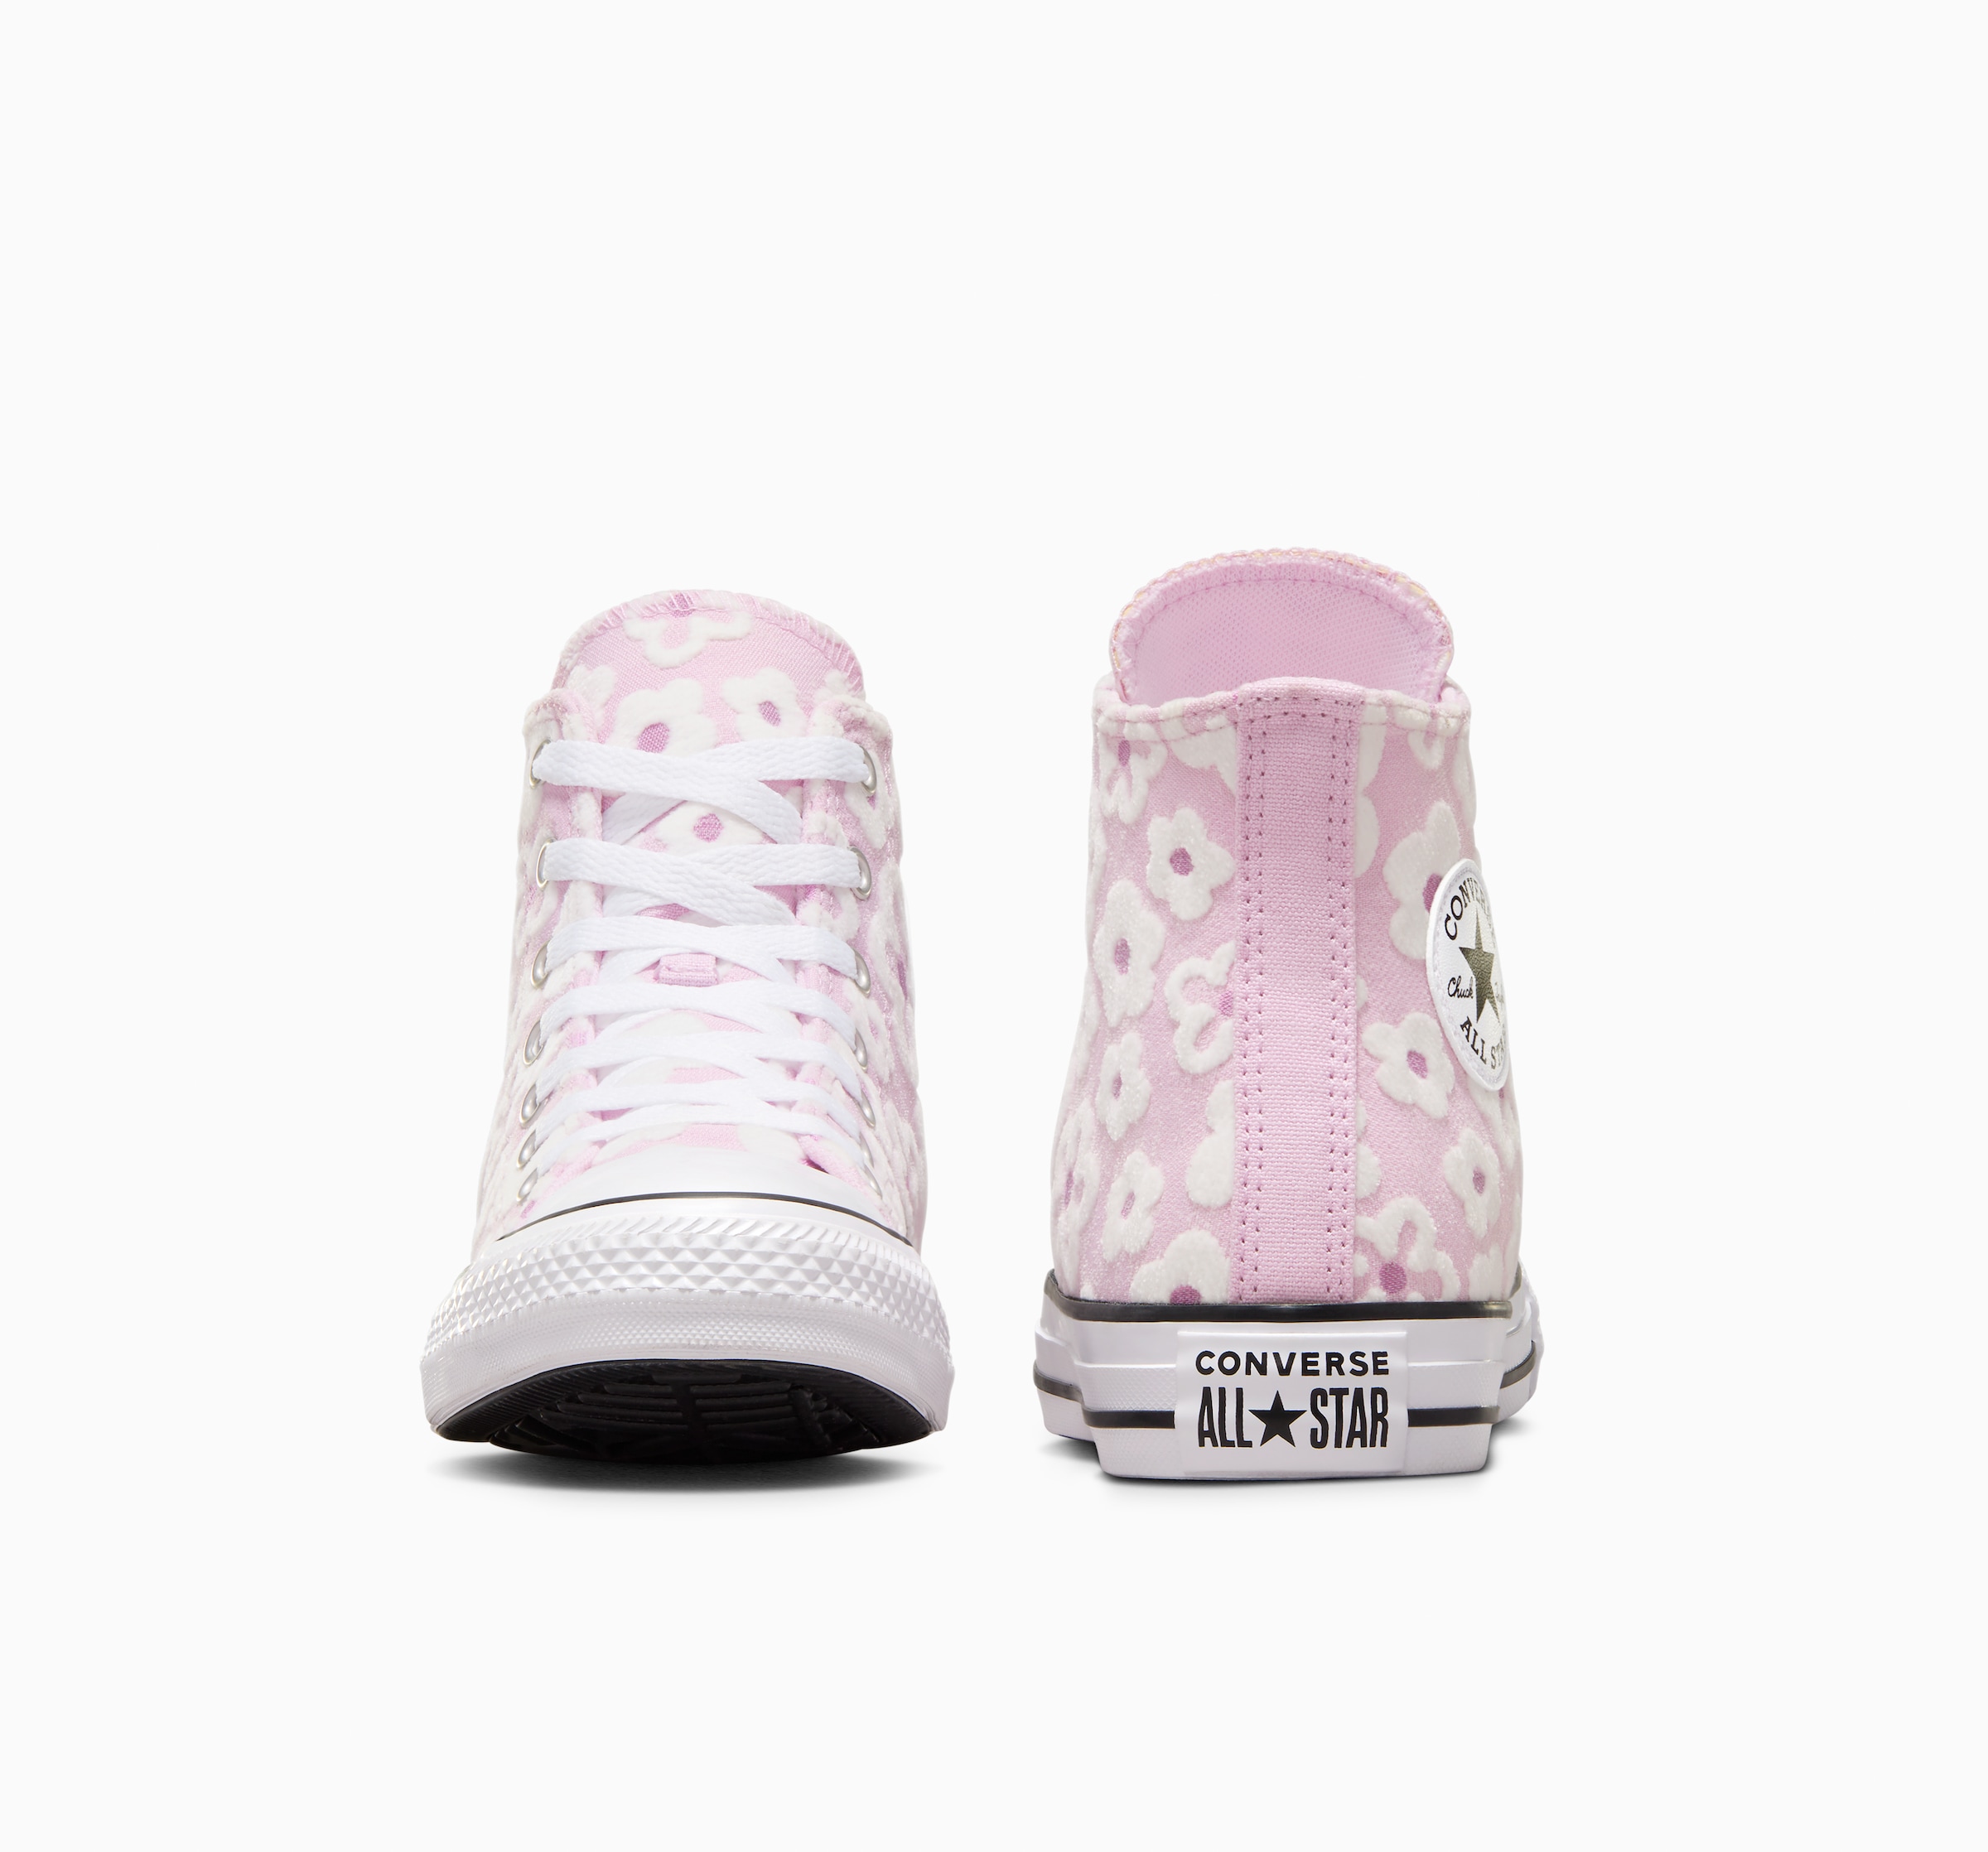 Converse Sneaker »CHUCK TAYLOR ALL STAR FLORAL EMBROI«